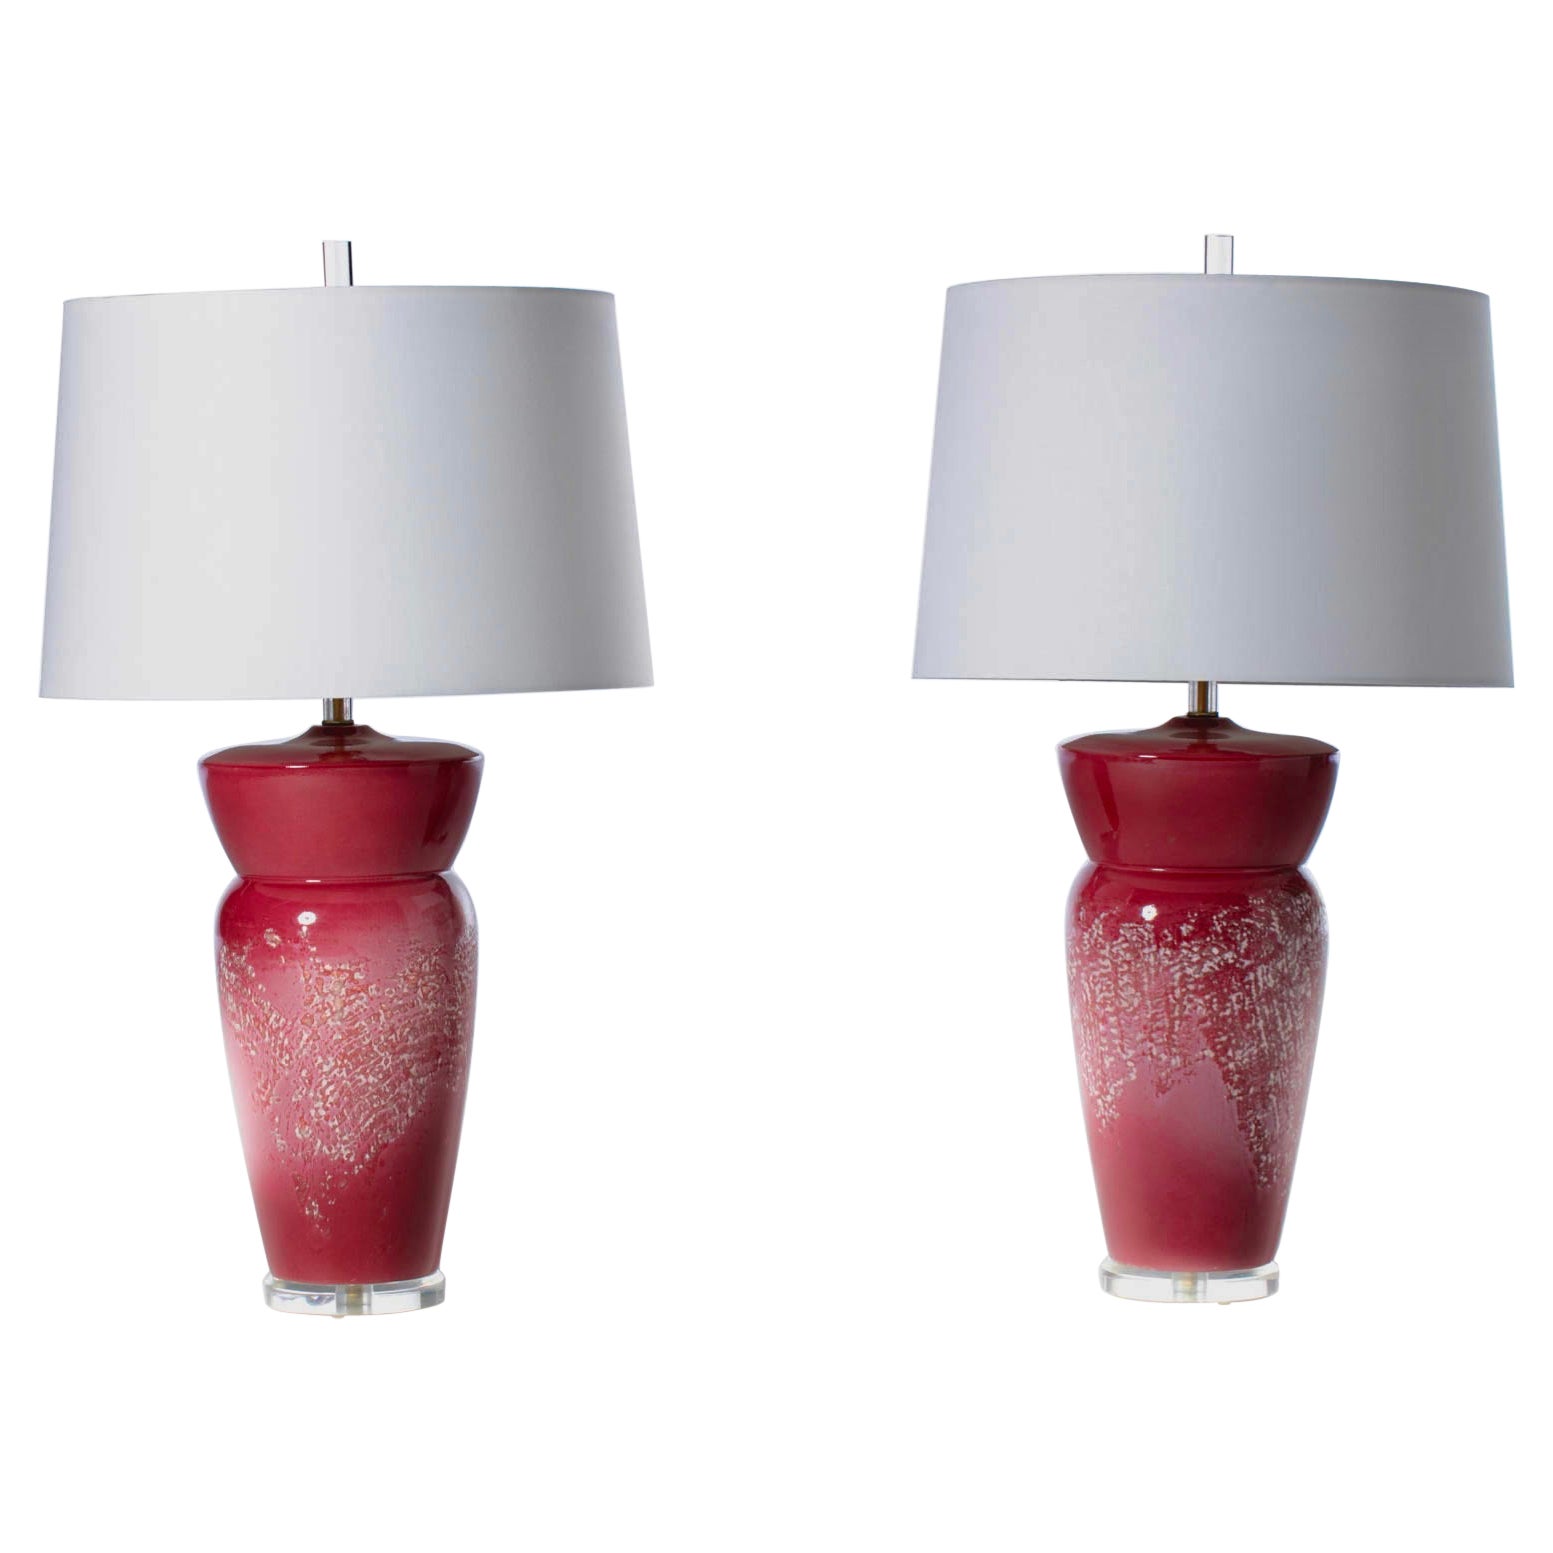 Monumental Post Modern Raspberry Pink Sorbet Ceramic Lamps by Sunset c. 1980 For Sale